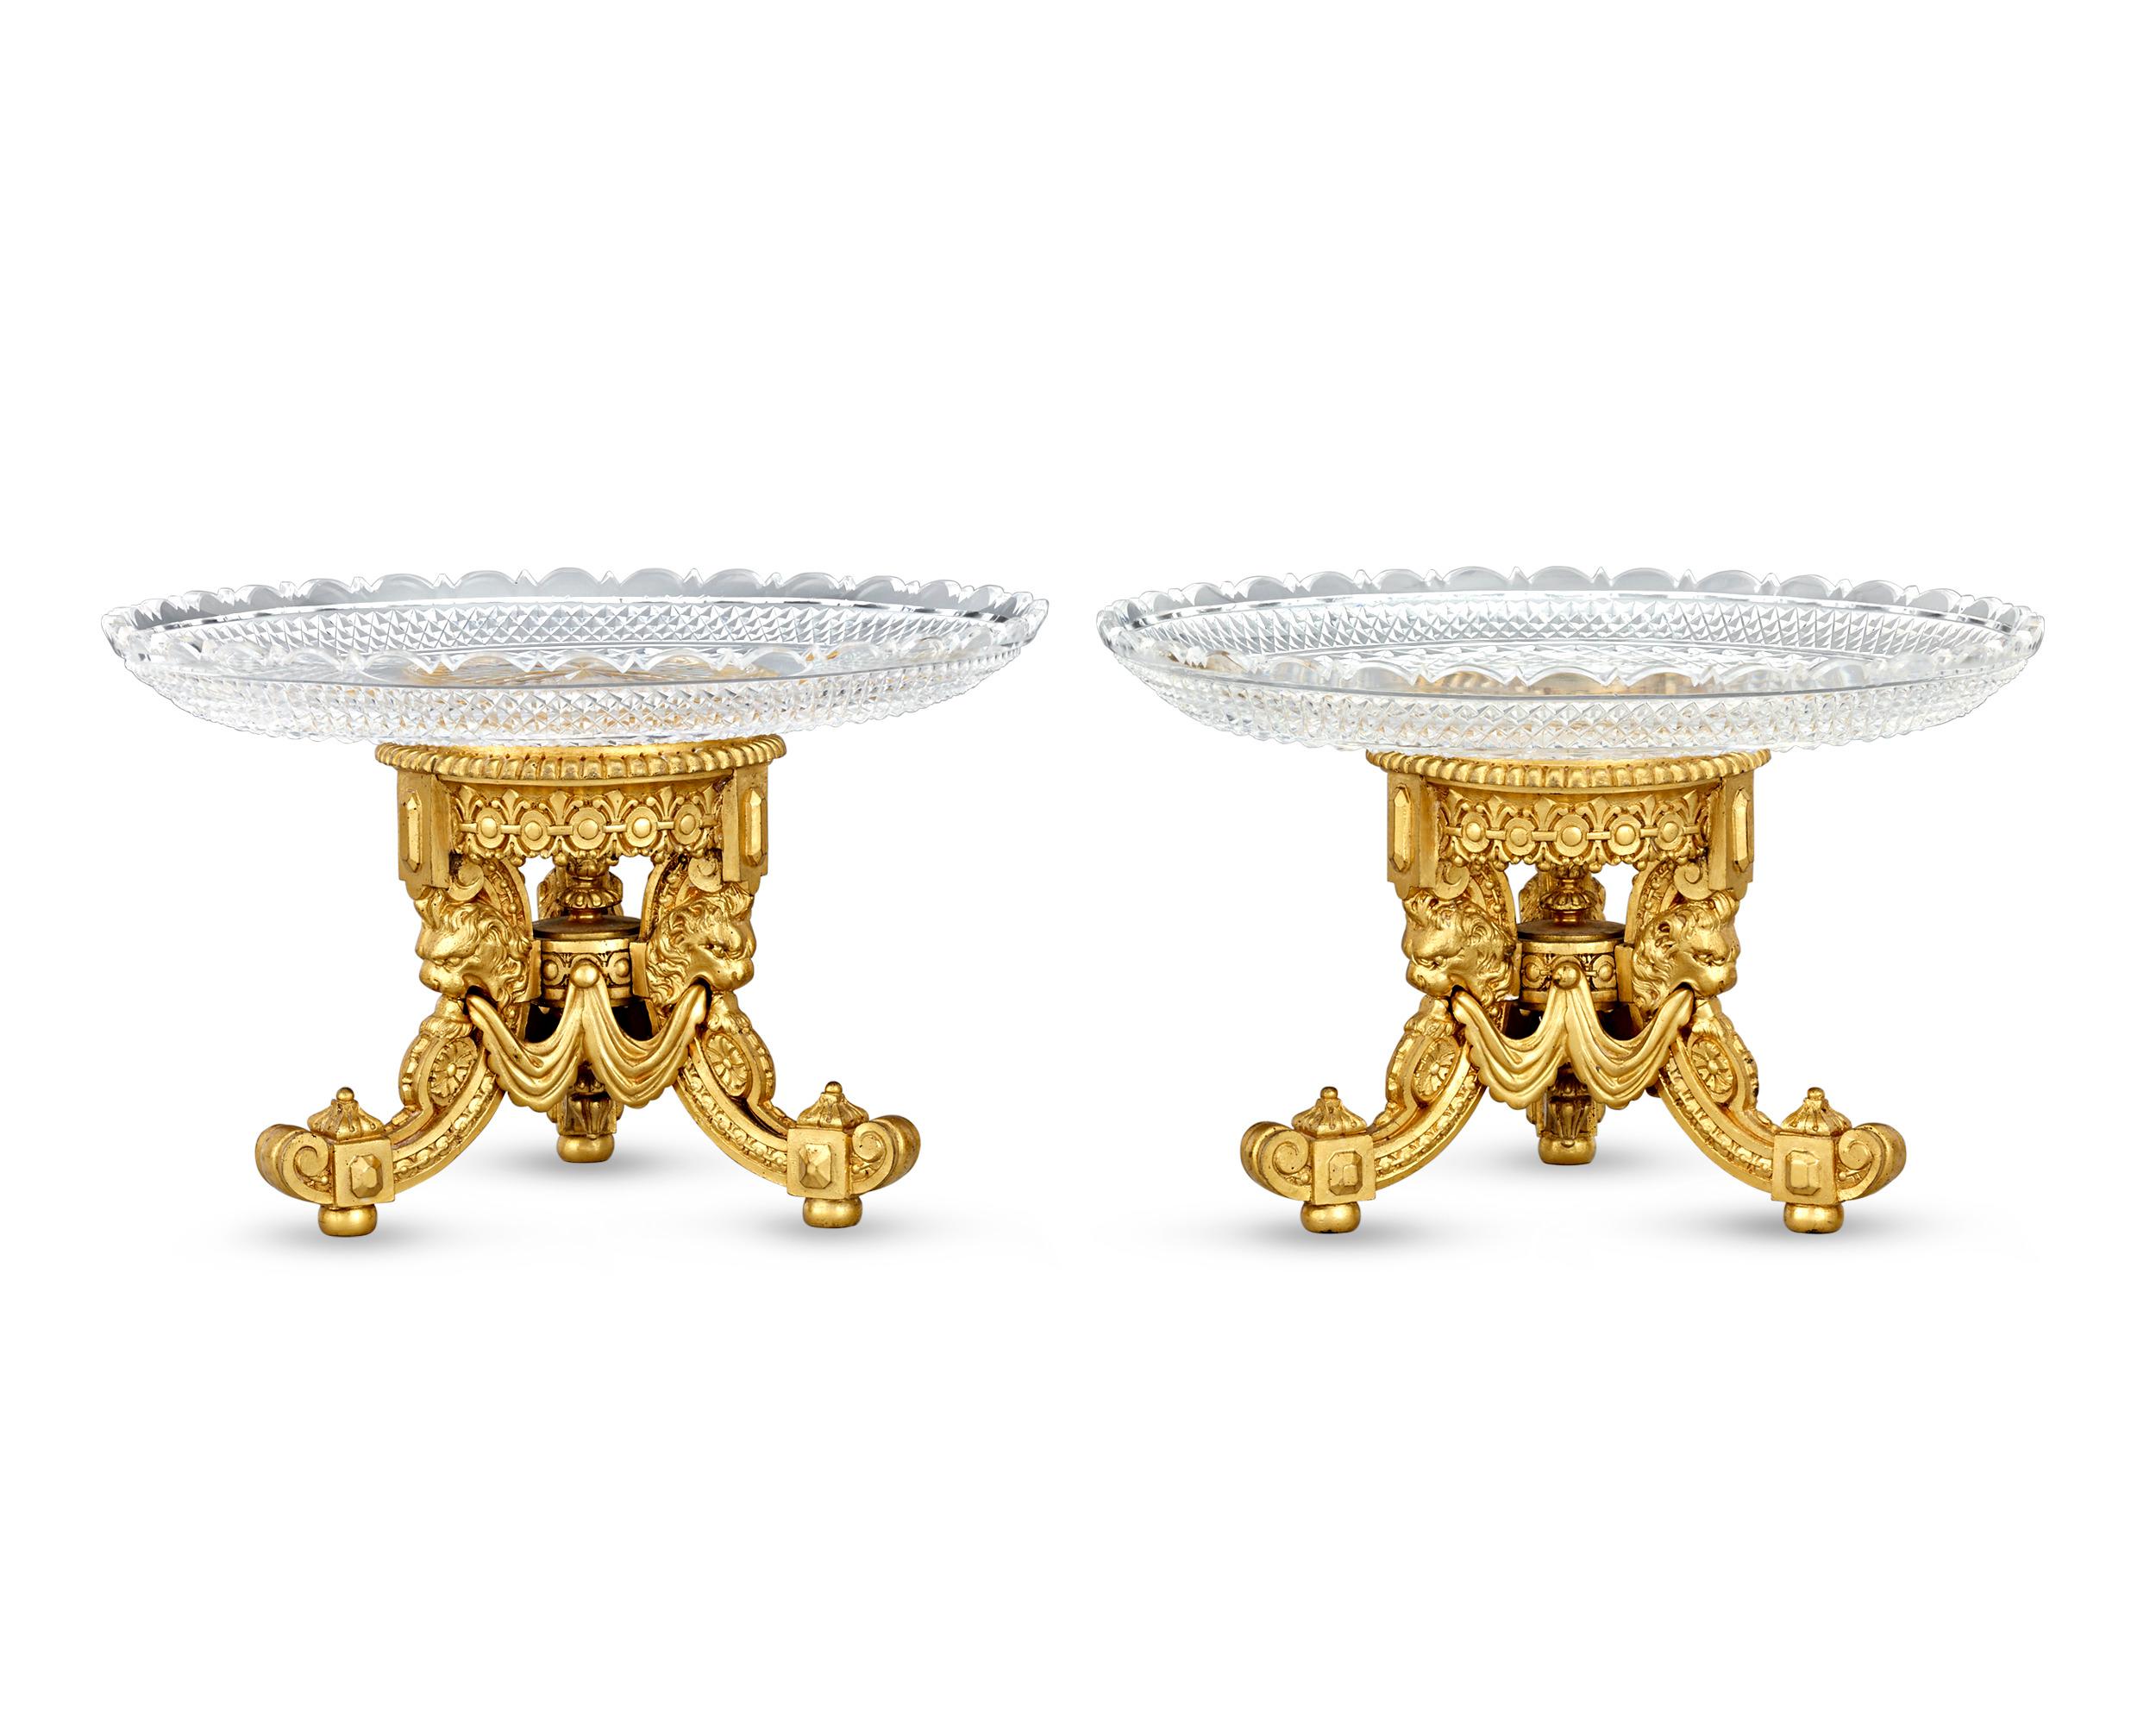 French Ormolu and Cut Glass Table Garniture by Baccarat